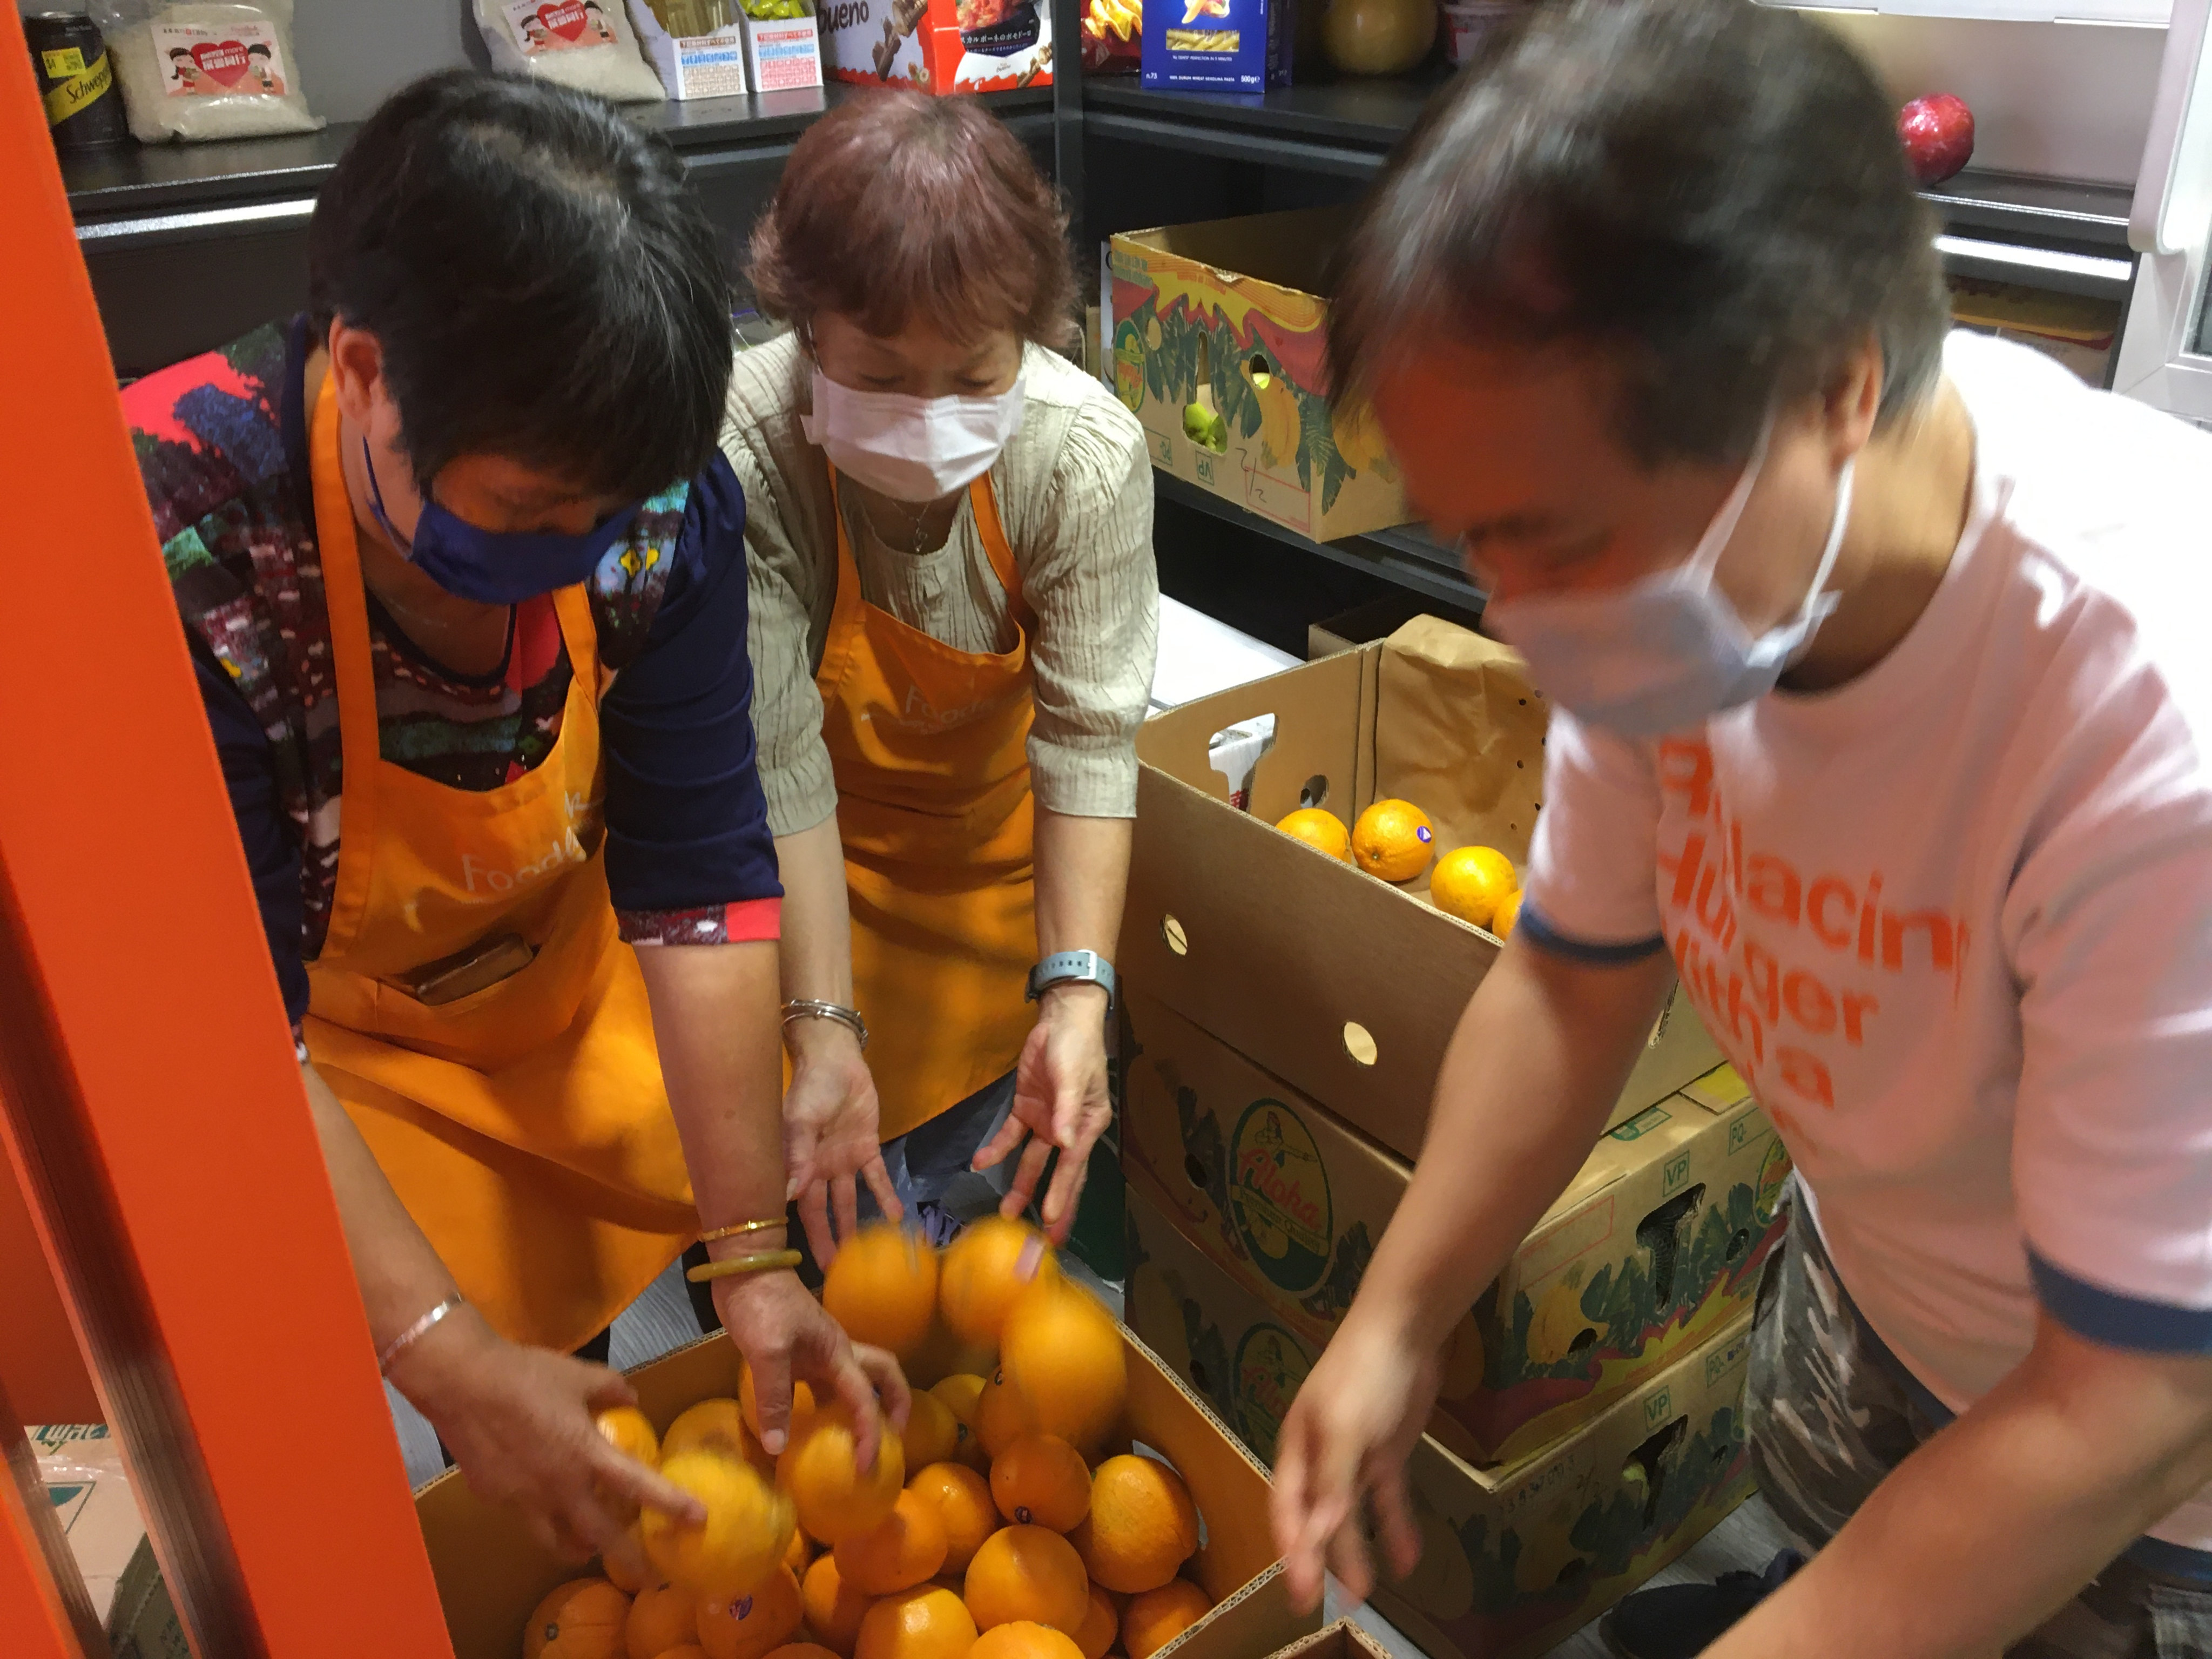 Foodlink Mart’s store manager (right) and two elderly beneficiaries, who are also volunteers, sort fruits delivered to the store from supermarkets. Photo: Cindy Sui